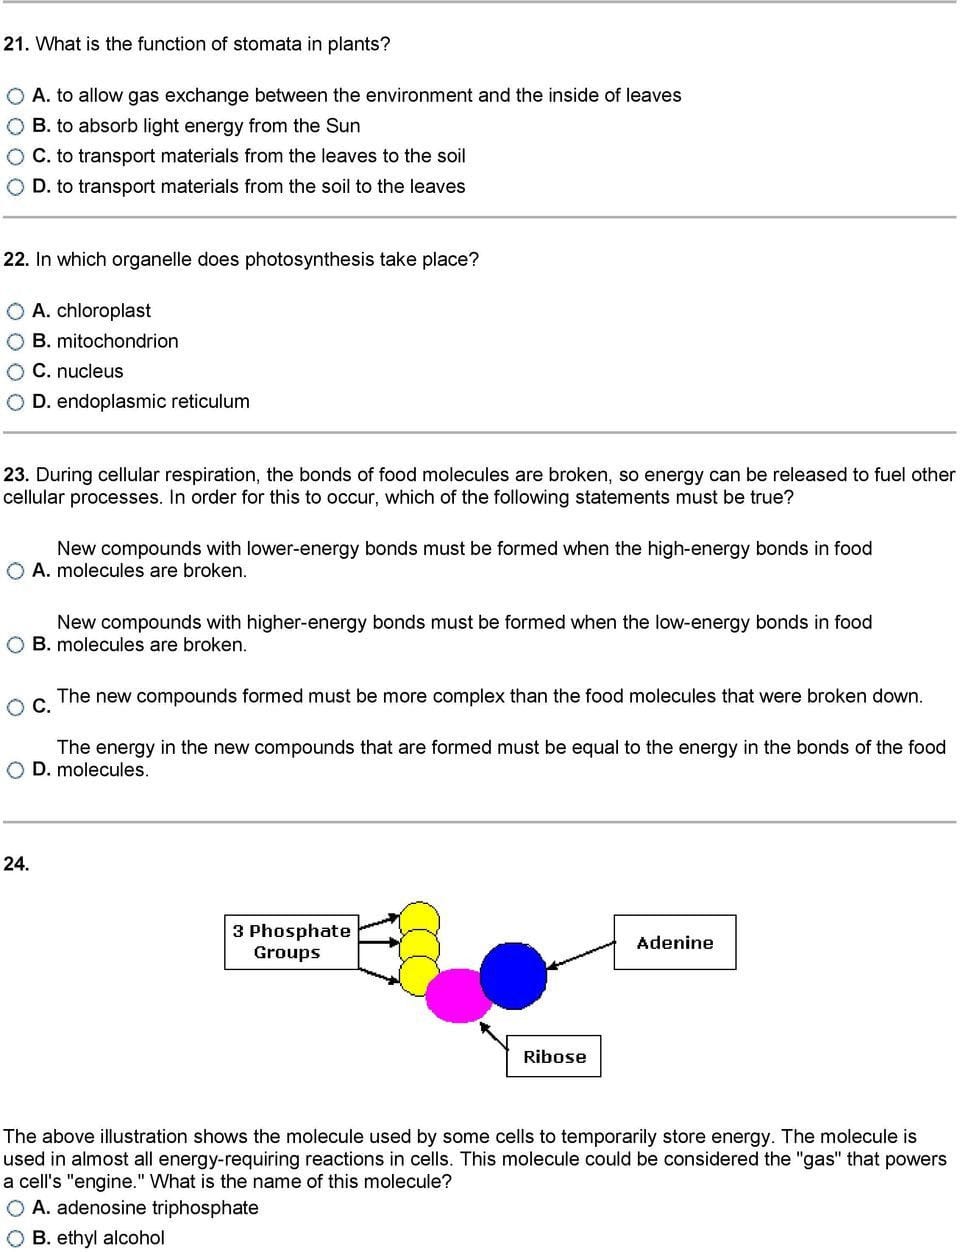 Bill Nye Pollution Solutions Worksheet Answers db excel com